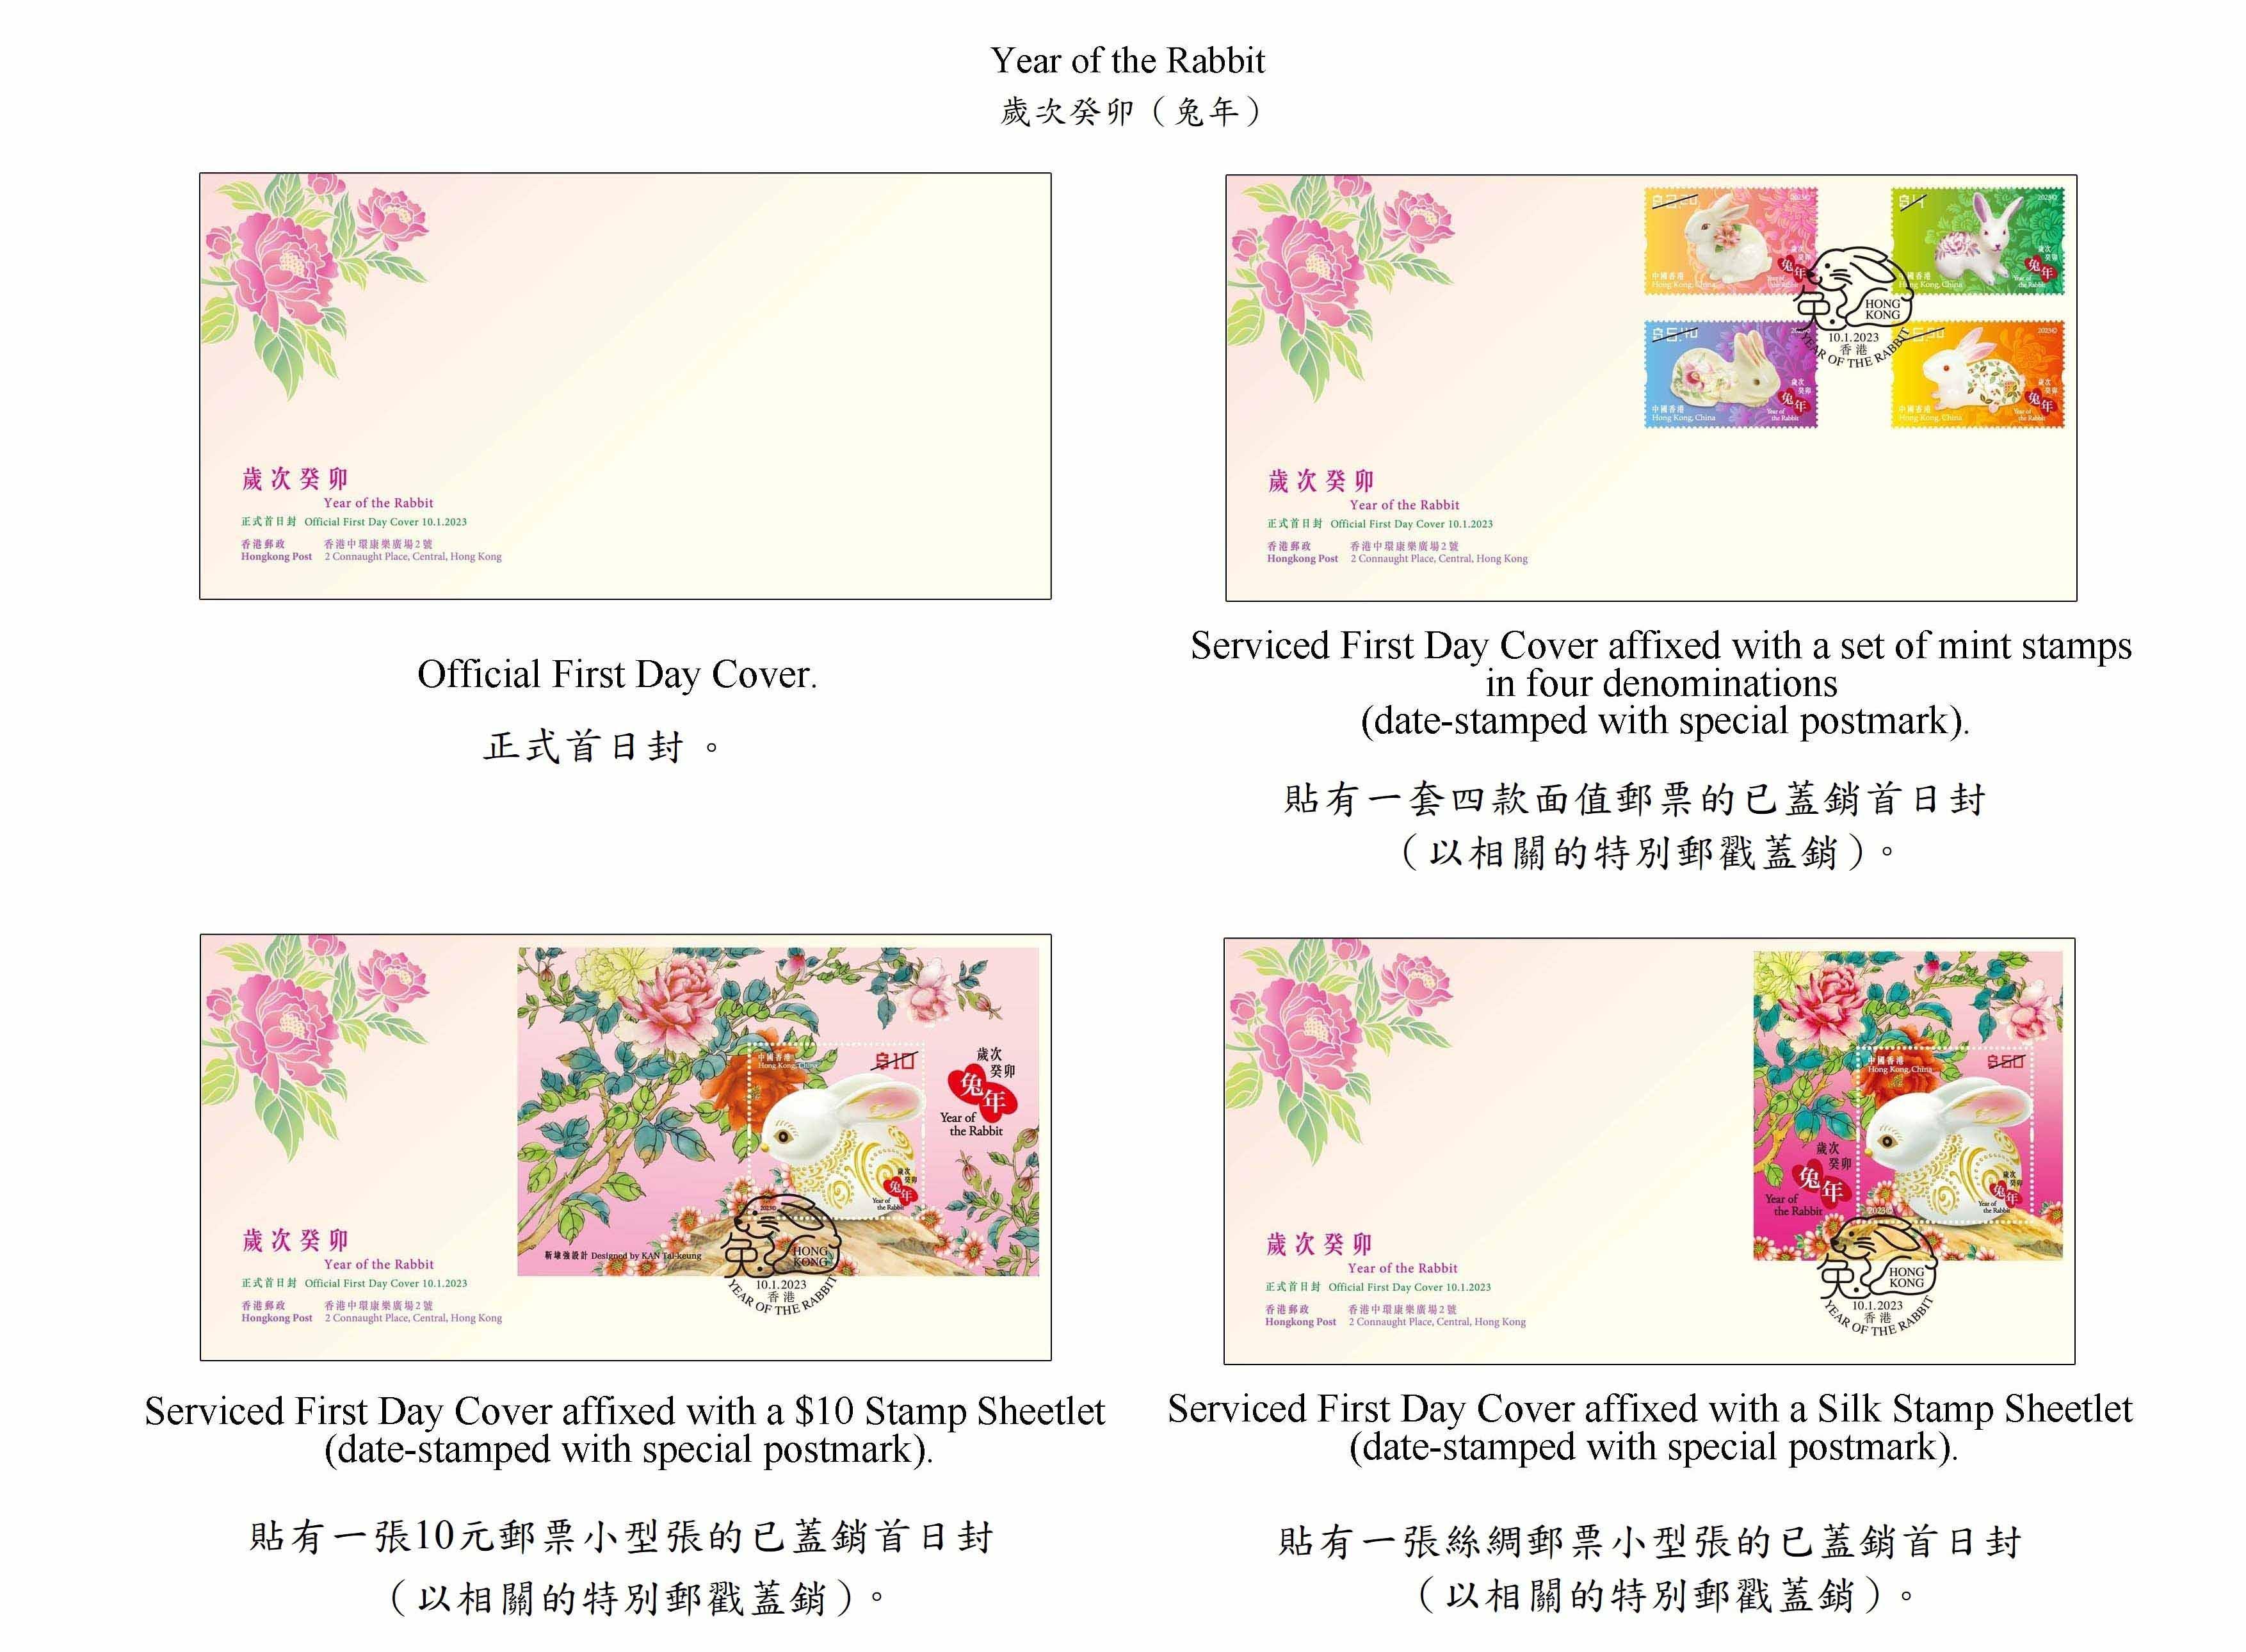 Hongkong Post will launch a special stamp issue and associated philatelic products with the theme "Year of the Rabbit" on January 10, 2023 (Tuesday). Photo shows the first day covers.

